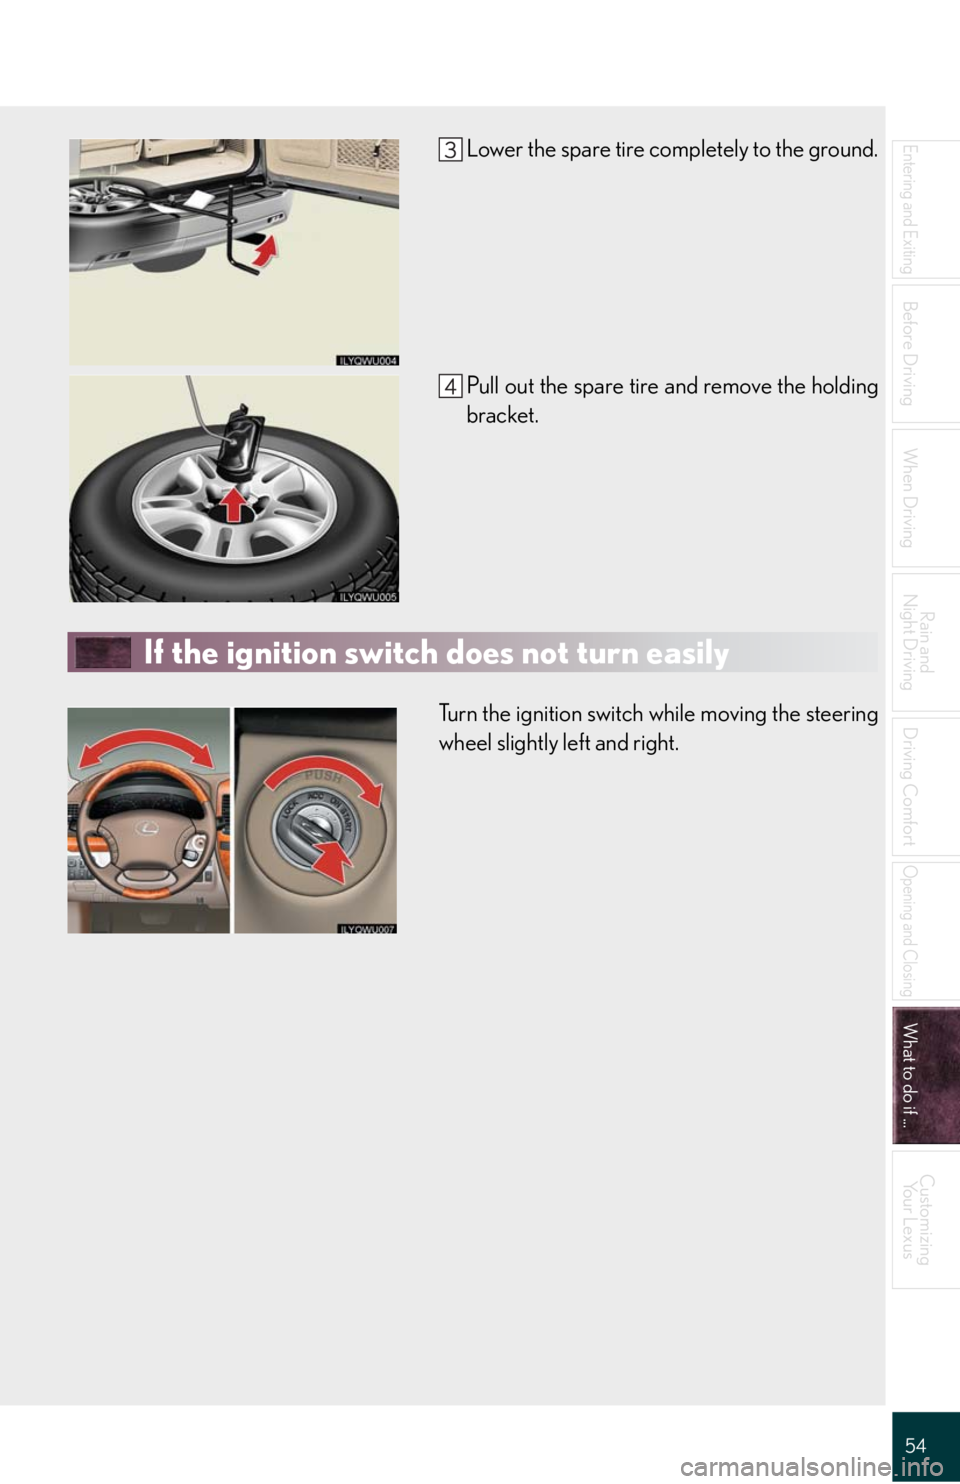 Lexus GX470 2008  Opening, closing and locking the doors / LEXUS 2008 GX470 QUICK GUIDE OWNERS MANUAL (OM60D81U) 54
Entering and Exiting
Before Driving
When Driving
Rain and 
Night Driving
Driving Comfort
Opening and Closing
What to do if ...
Customizing
Yo u r  L e x u s
Lower the spare tire completely to the g